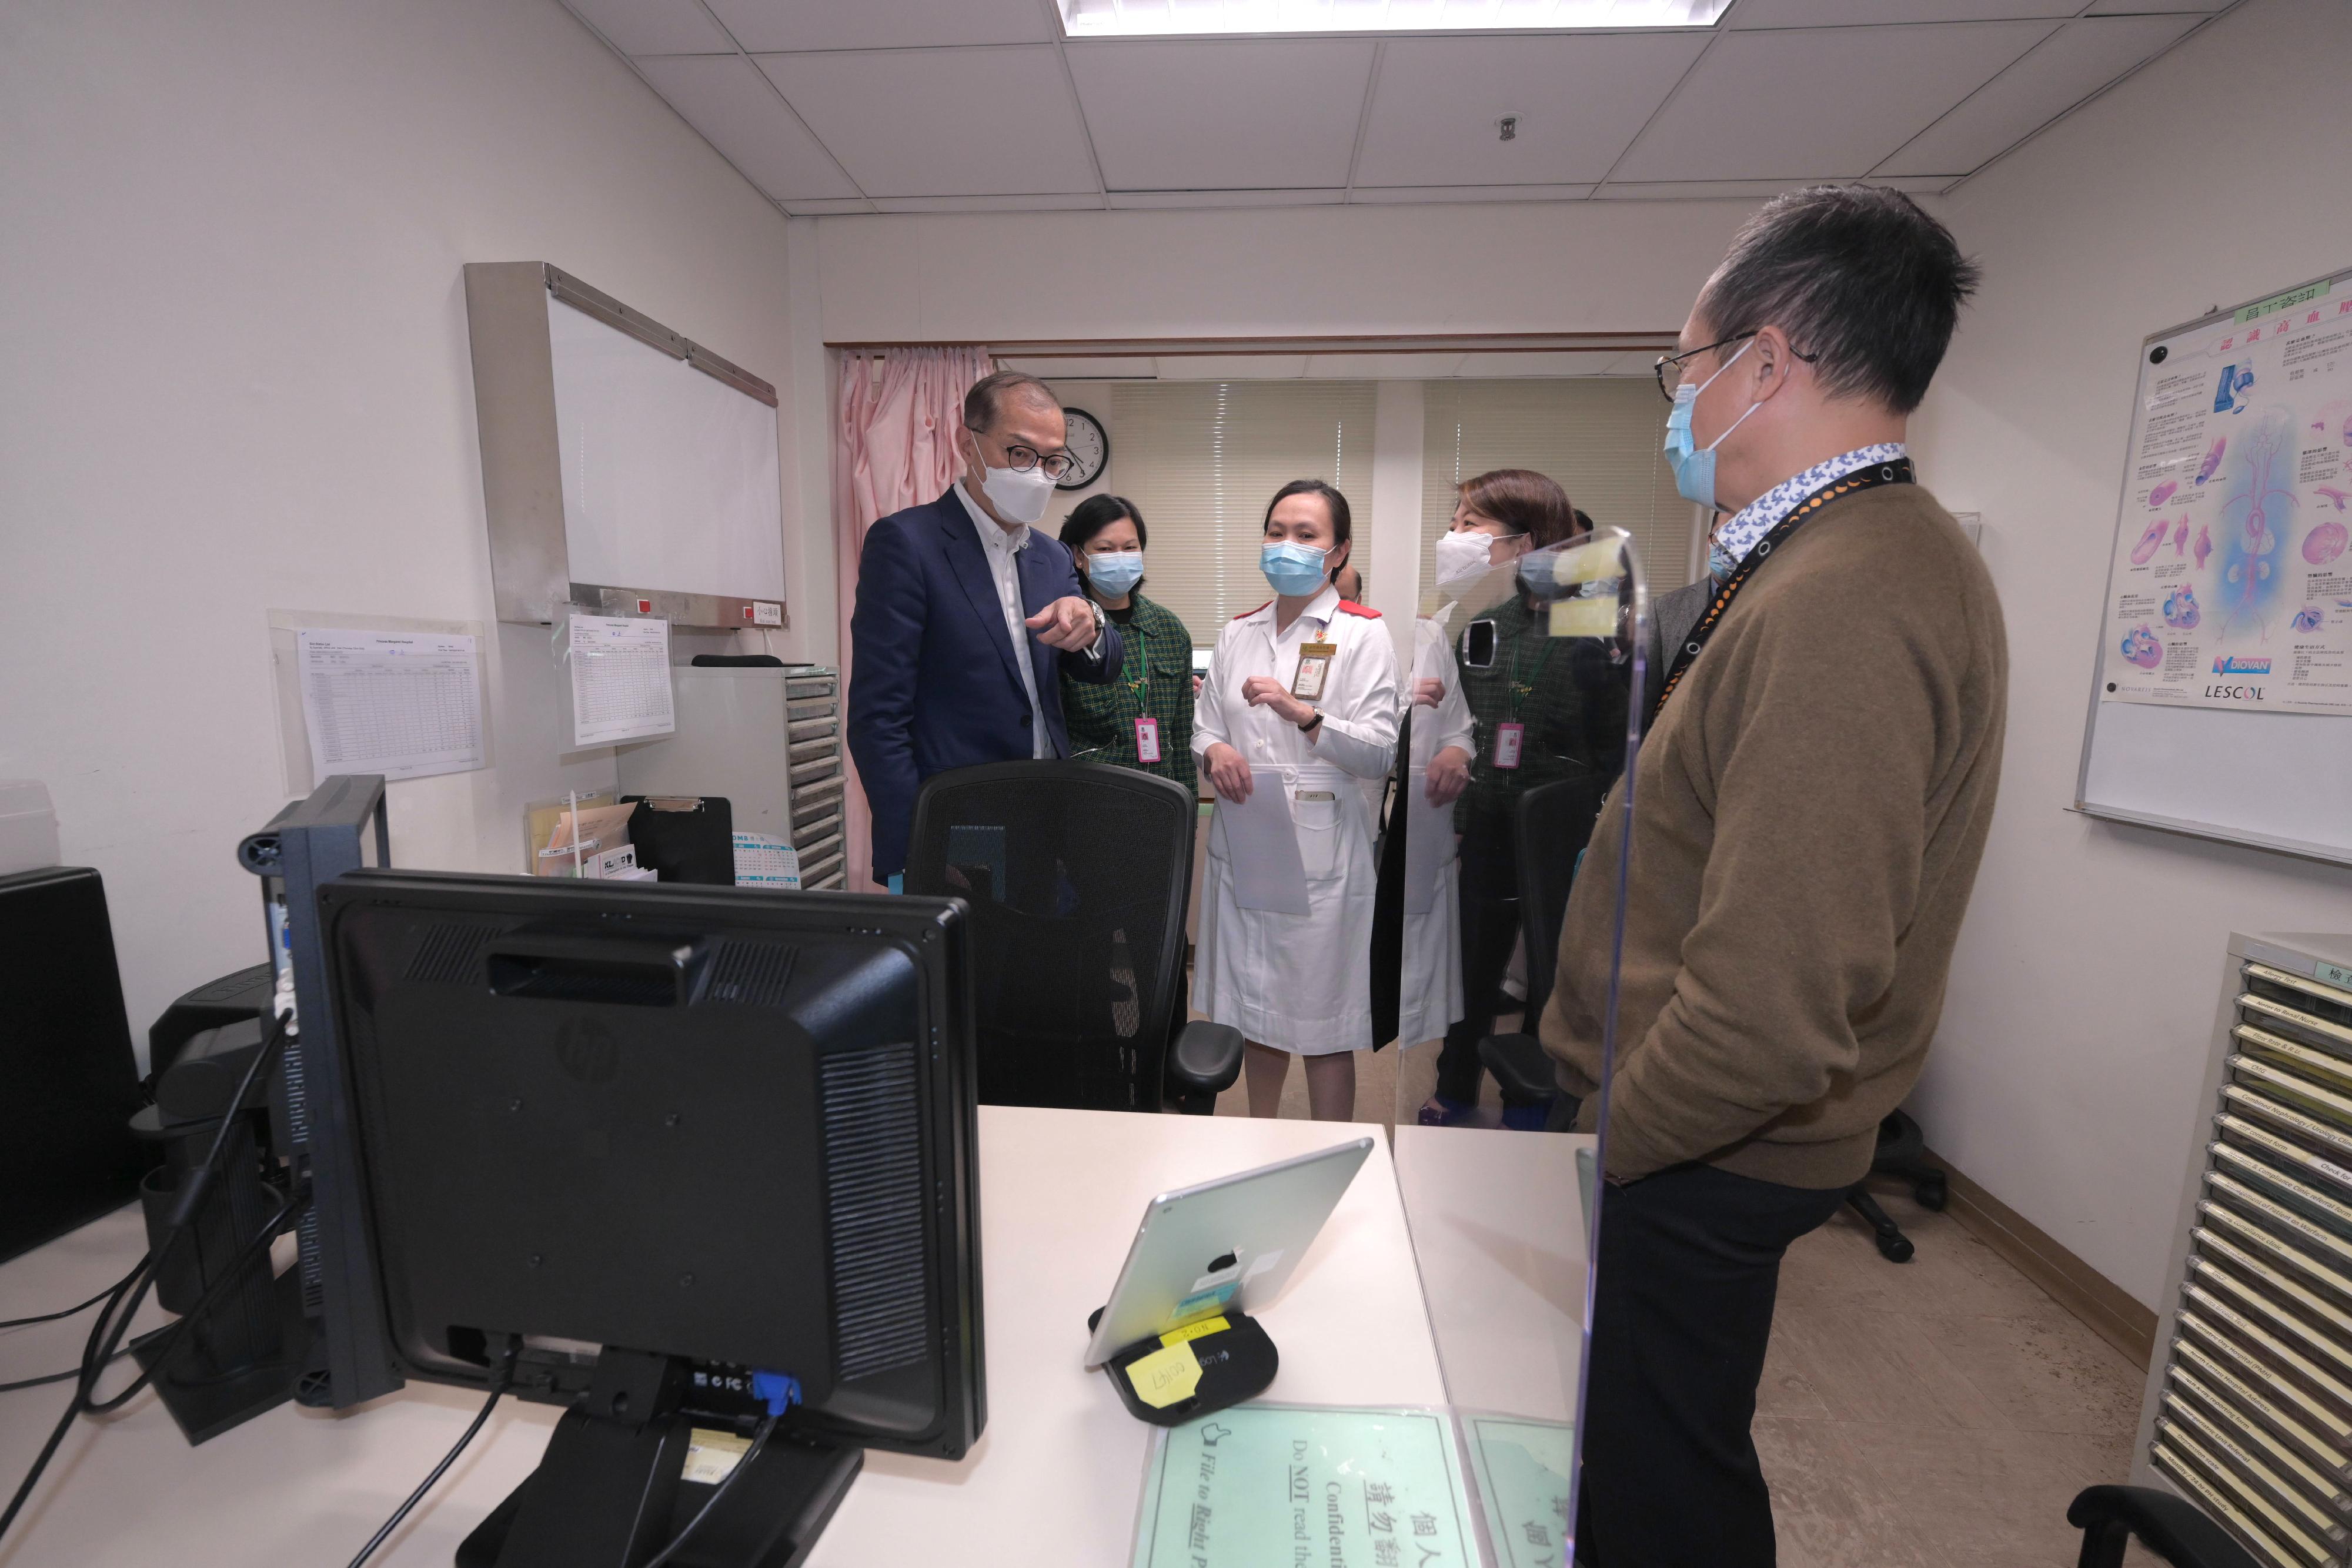 The Secretary for Health, Professor Lo Chung-mau (first left), and the Under Secretary for Health, Dr Libby Lee (second right), visited Princess Margaret Hospital today (January 20) to get a grasp of the operation of the Medicine and Geriatrics Specialist Outpatient Clinic of the hospital.